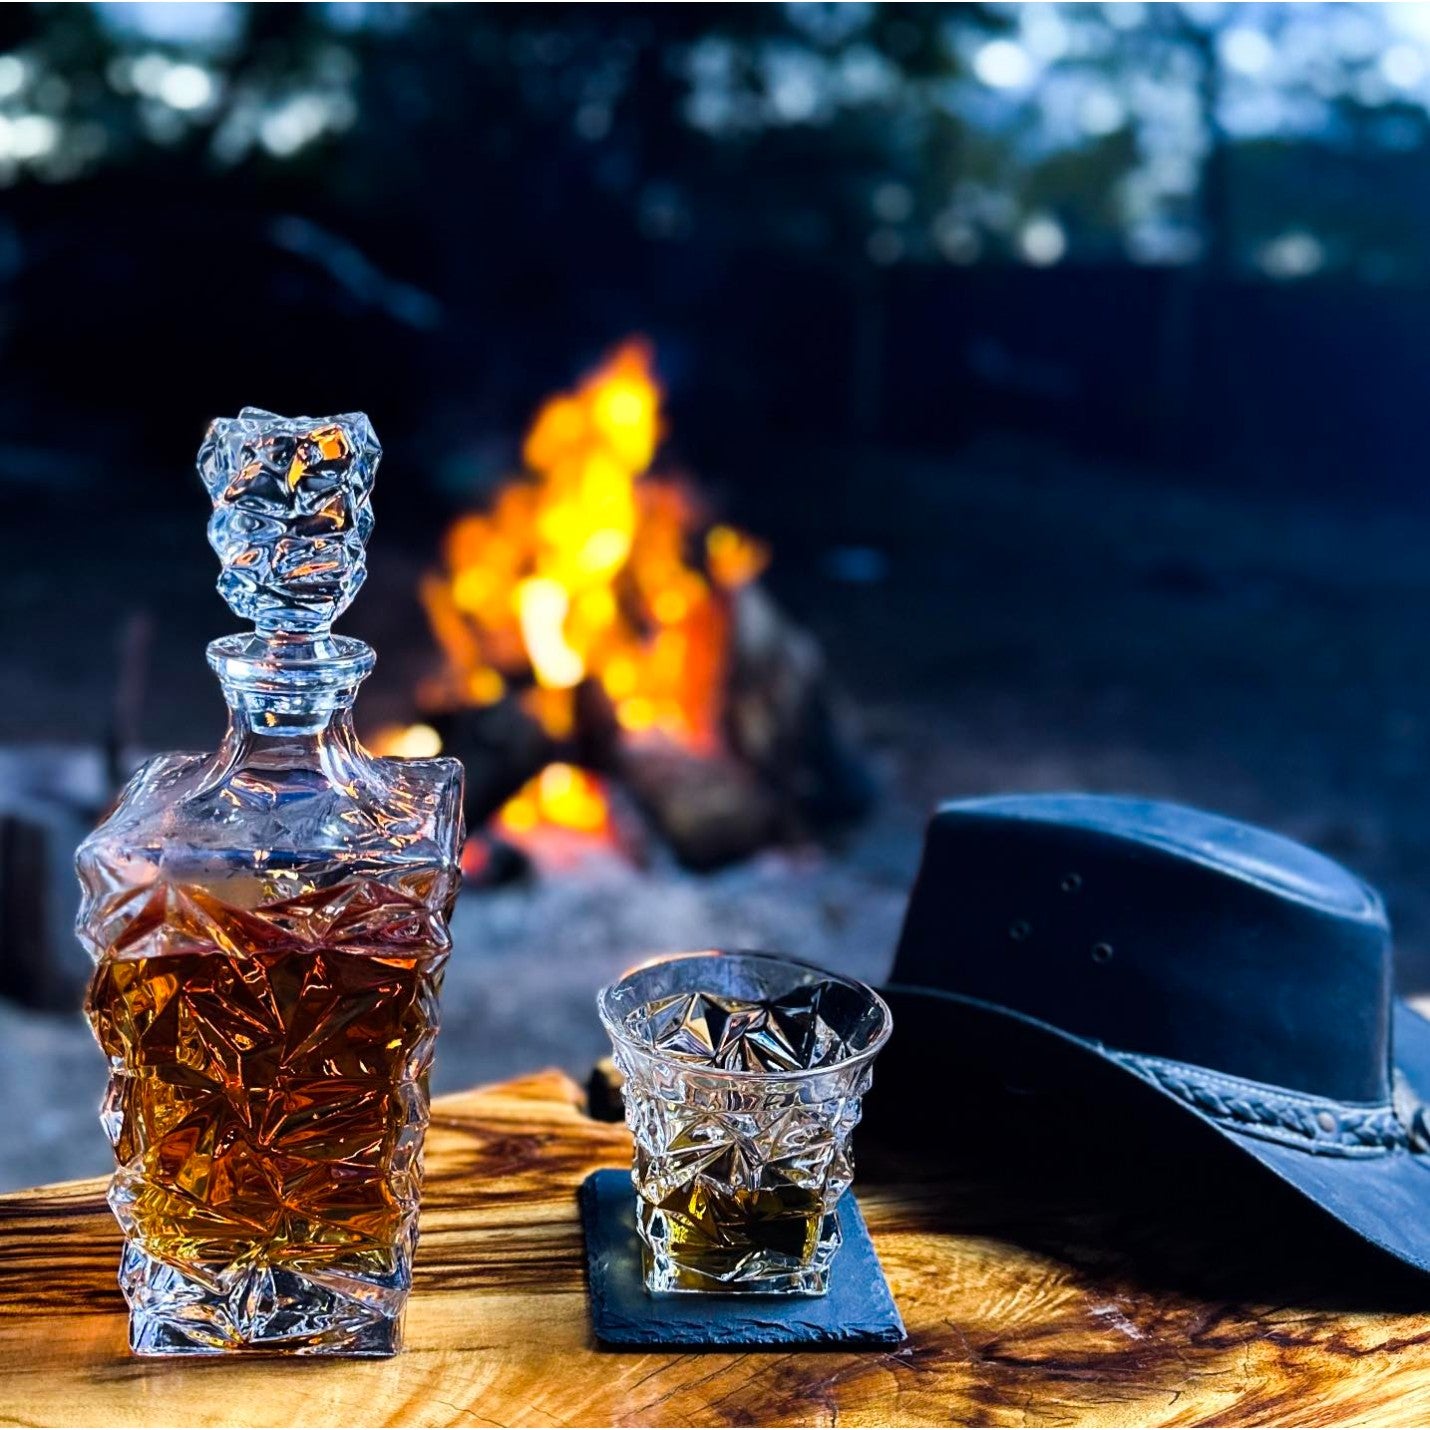 Whisky Decanter Jagged Edge Hat and Coaster Solkatt Designs